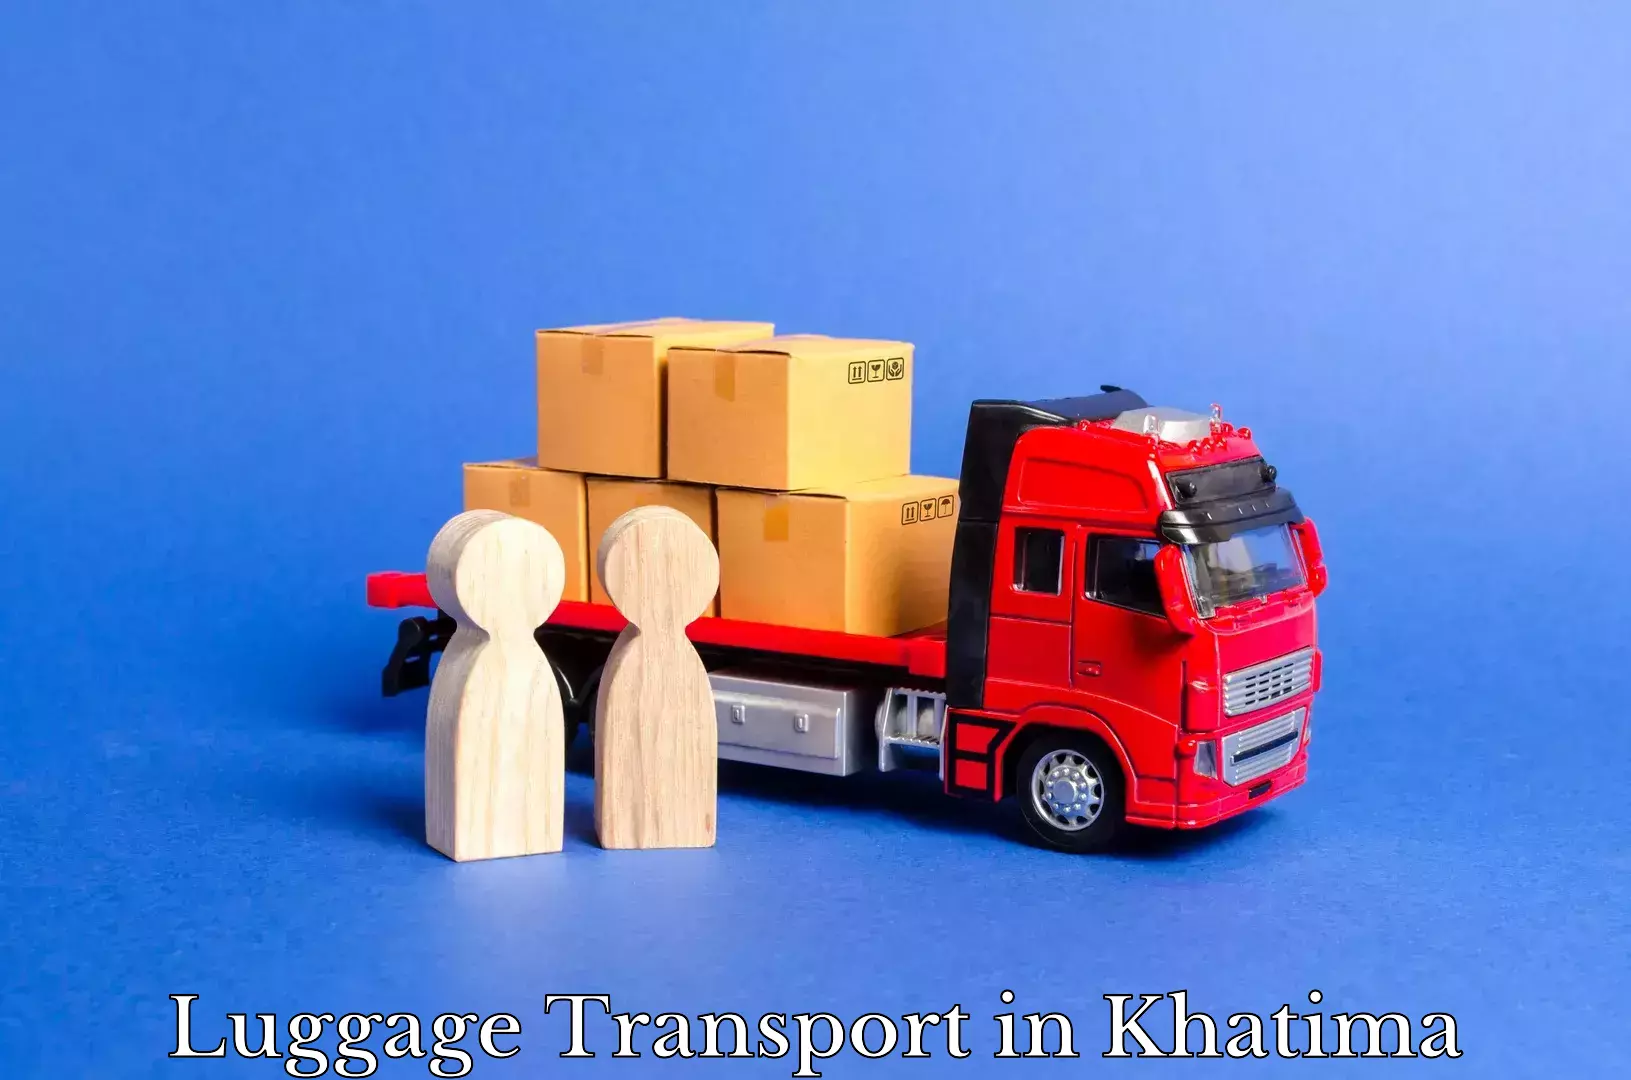 Luggage transport consultancy in Khatima